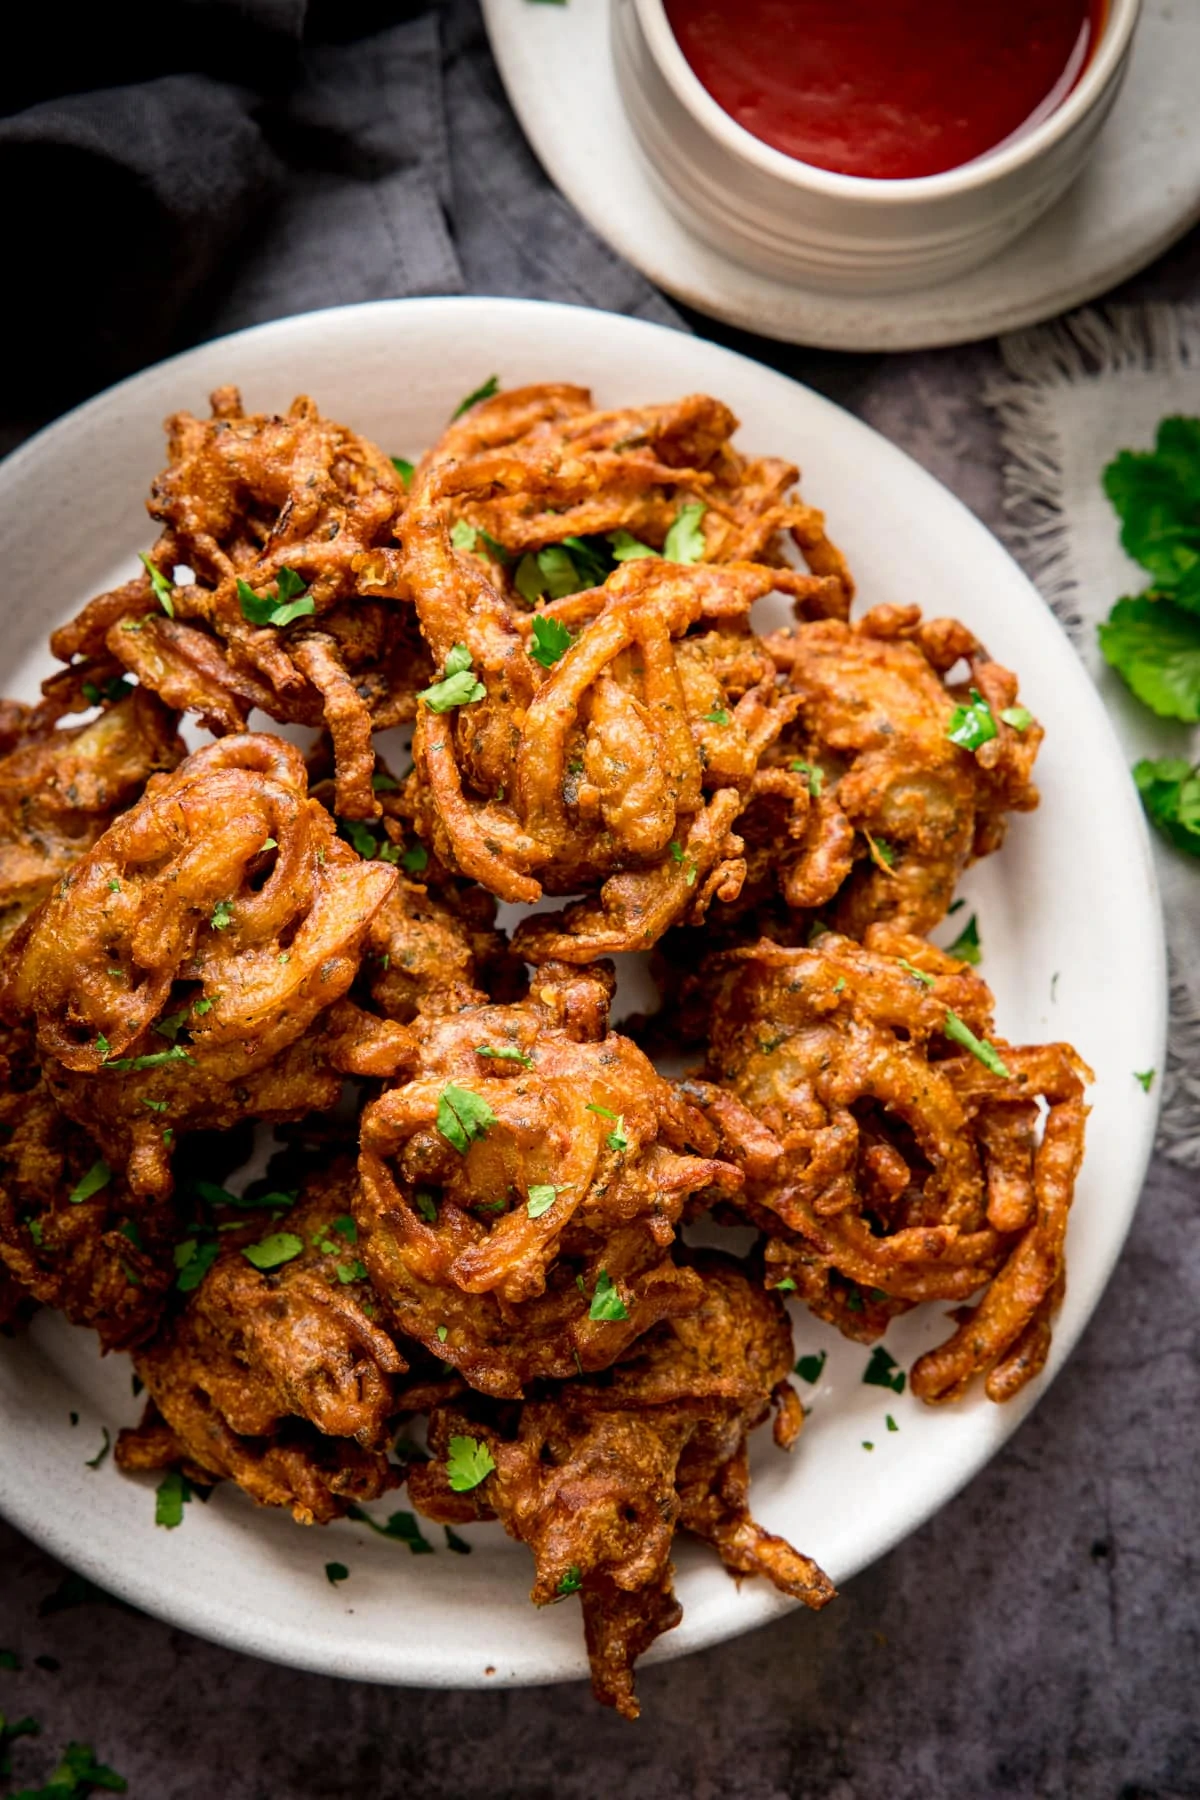 Onion bhajis on a white plate. Small white bowl filled with chilli sauce just in shot.